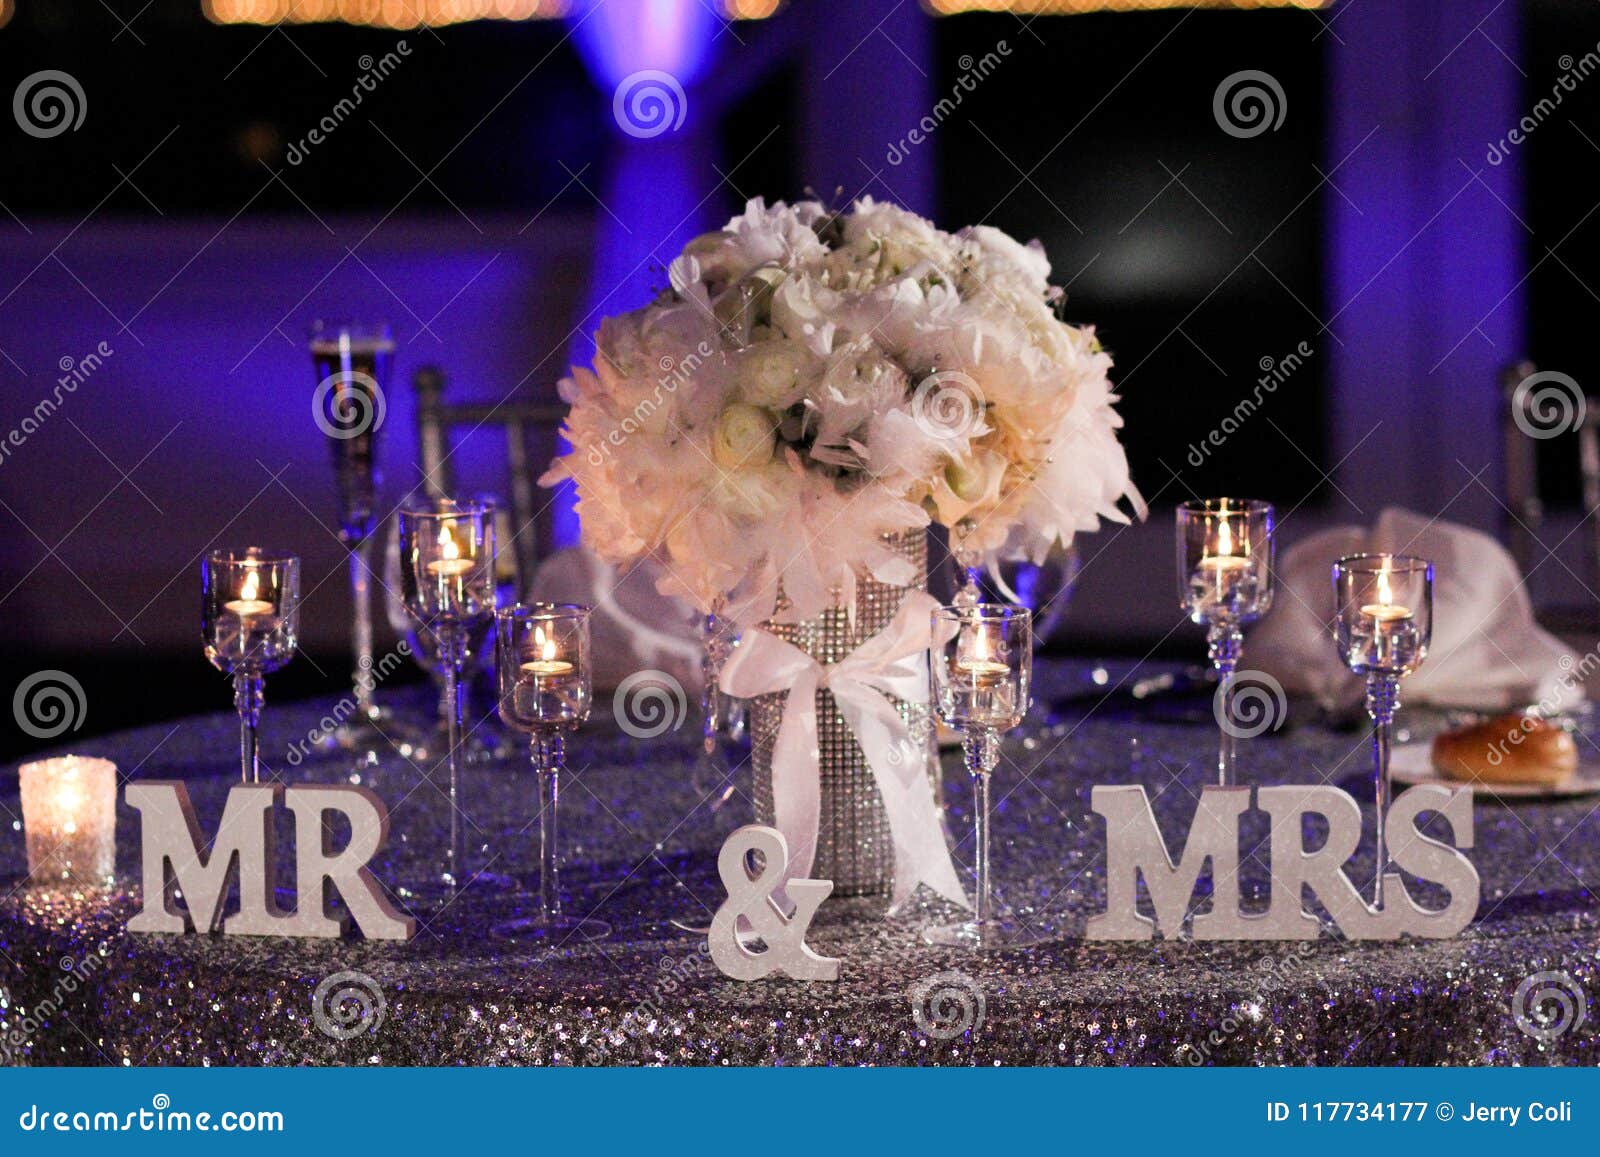 the bride and grooms table at their reception